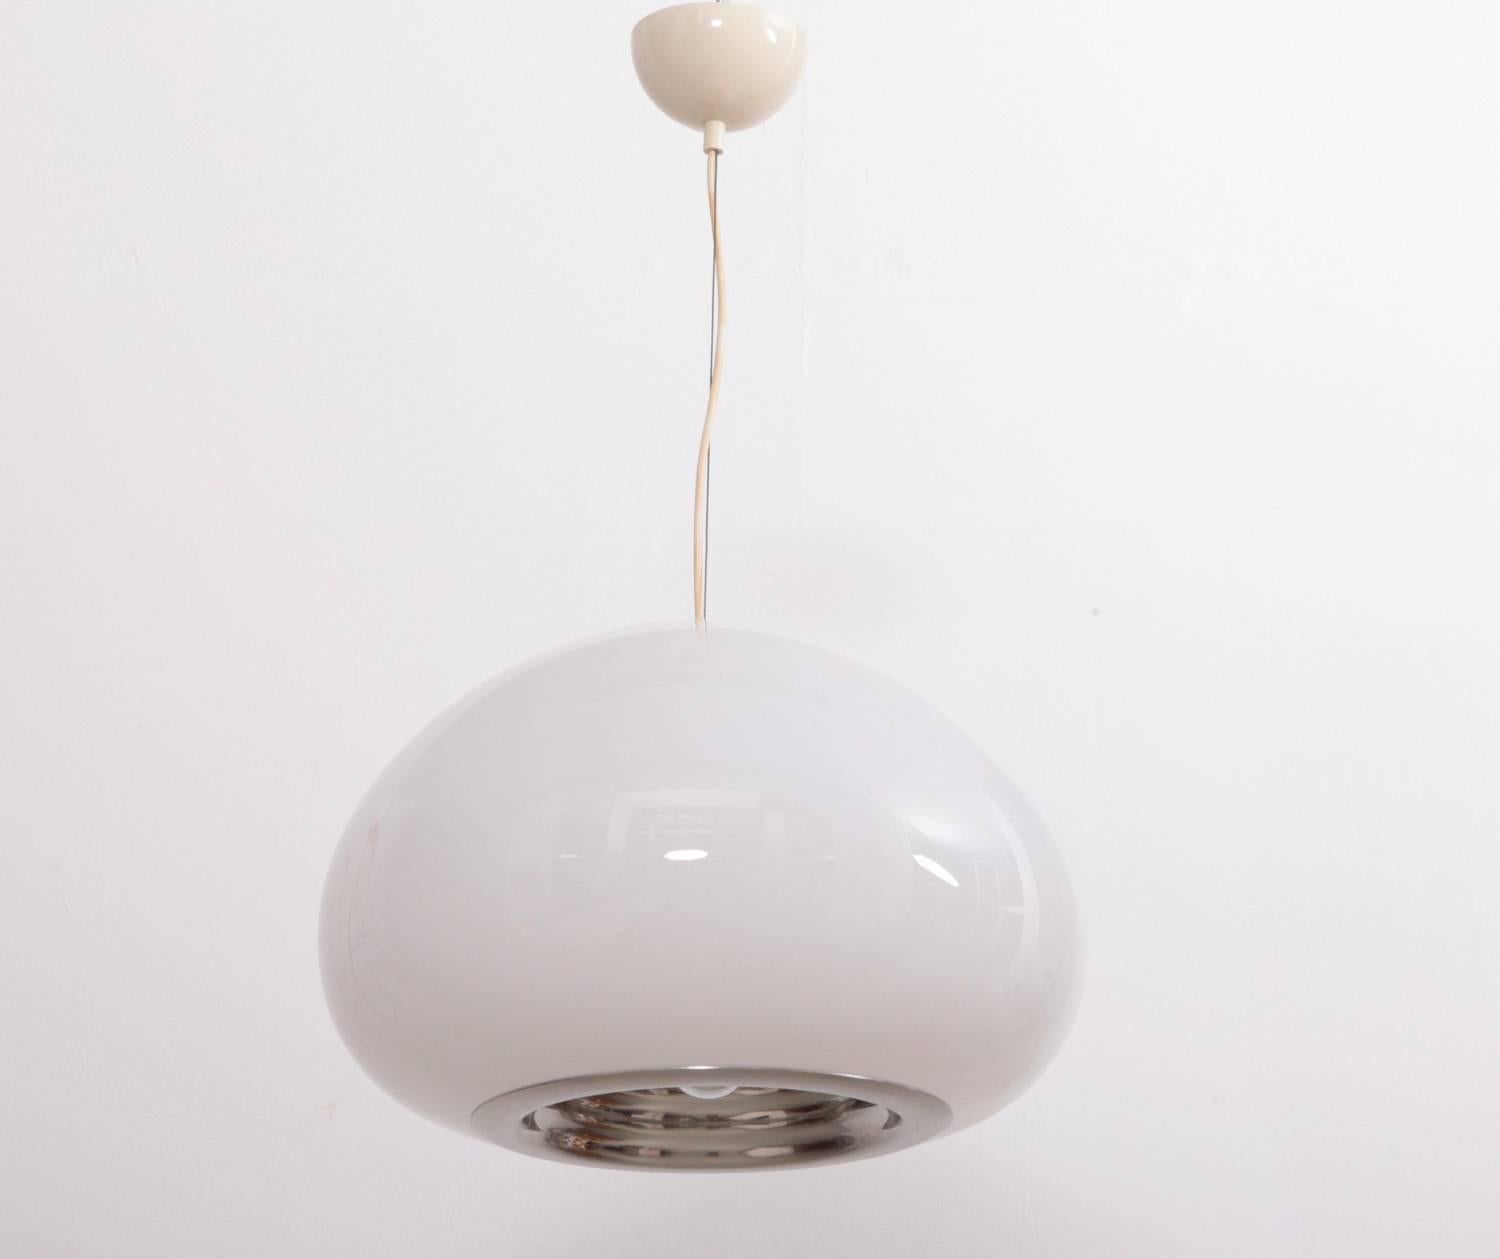 Pendant lamp with opal glass bowl for diffused light. For concentrated light a polished aluminium reflector is fitted to the base with a silver domed reflector bulb. 